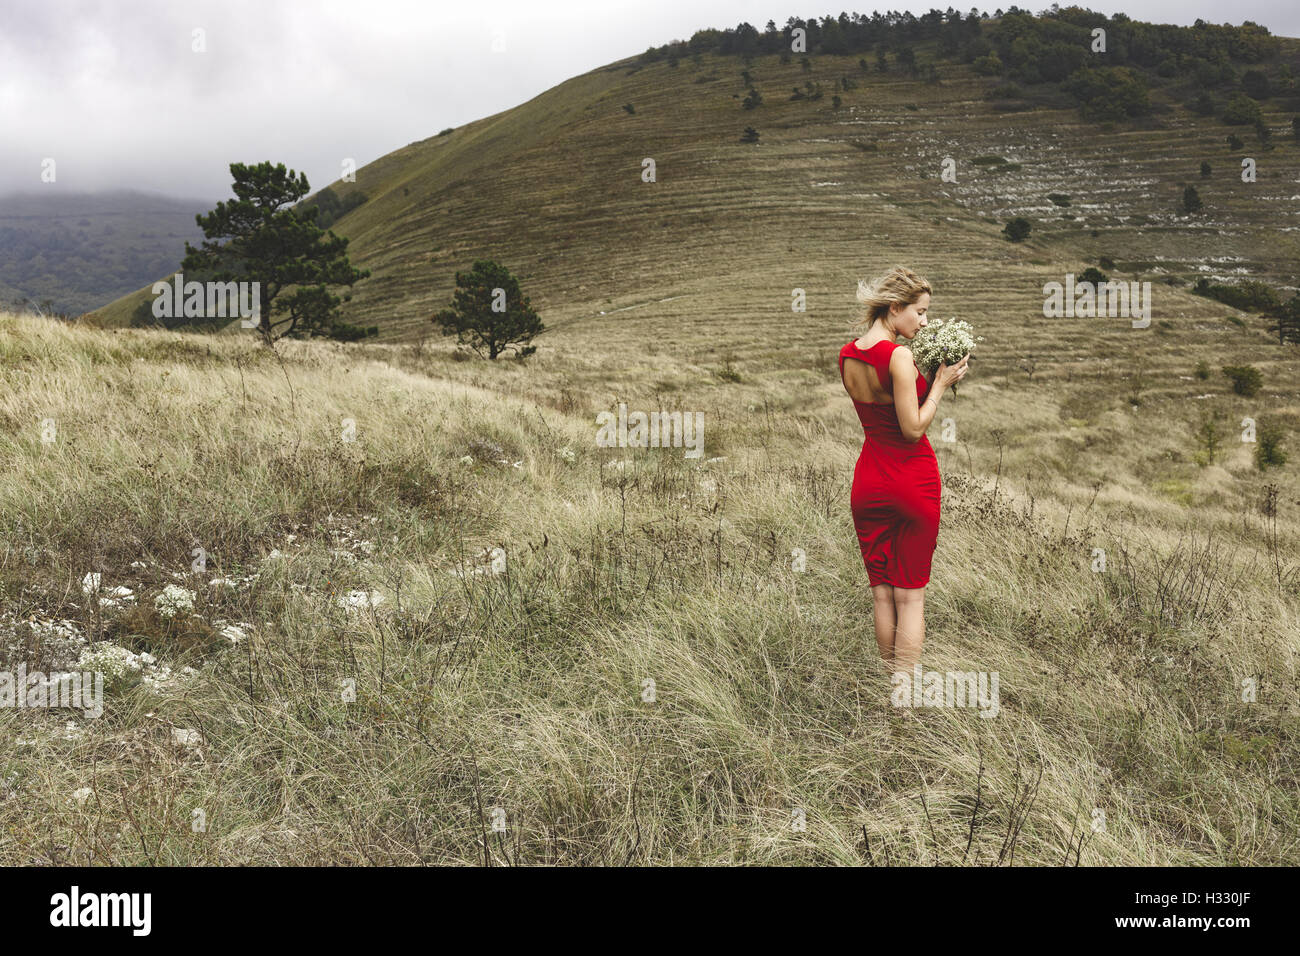 Woman in red dress holding a field flowers while standing in a meadow against terraced slope on a cloudy windy day Stock Photo